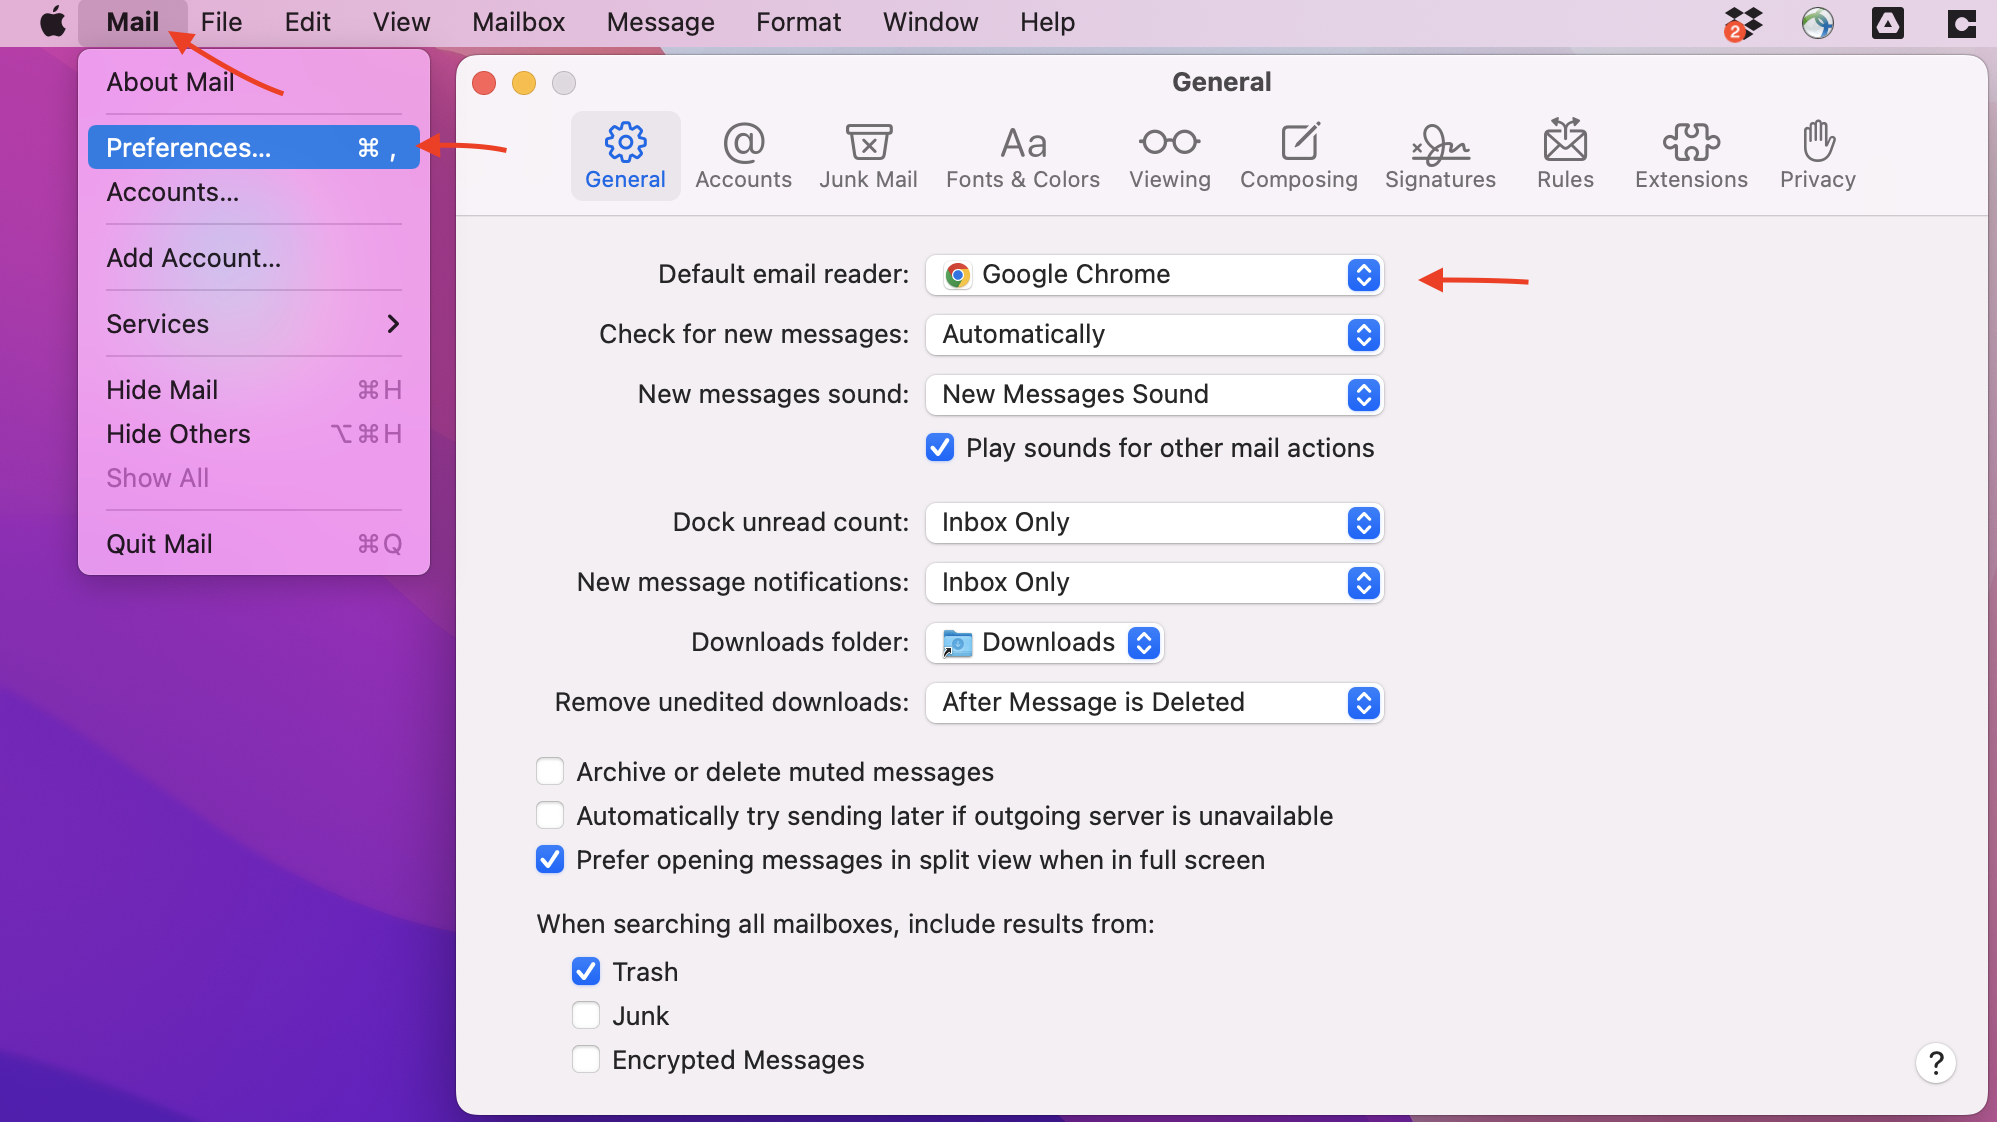 picture shows how to navigate to setting.  Open mail, select mail tab, select preferences, under general tab, choose to modify "default email reader" option to Google Chrome.